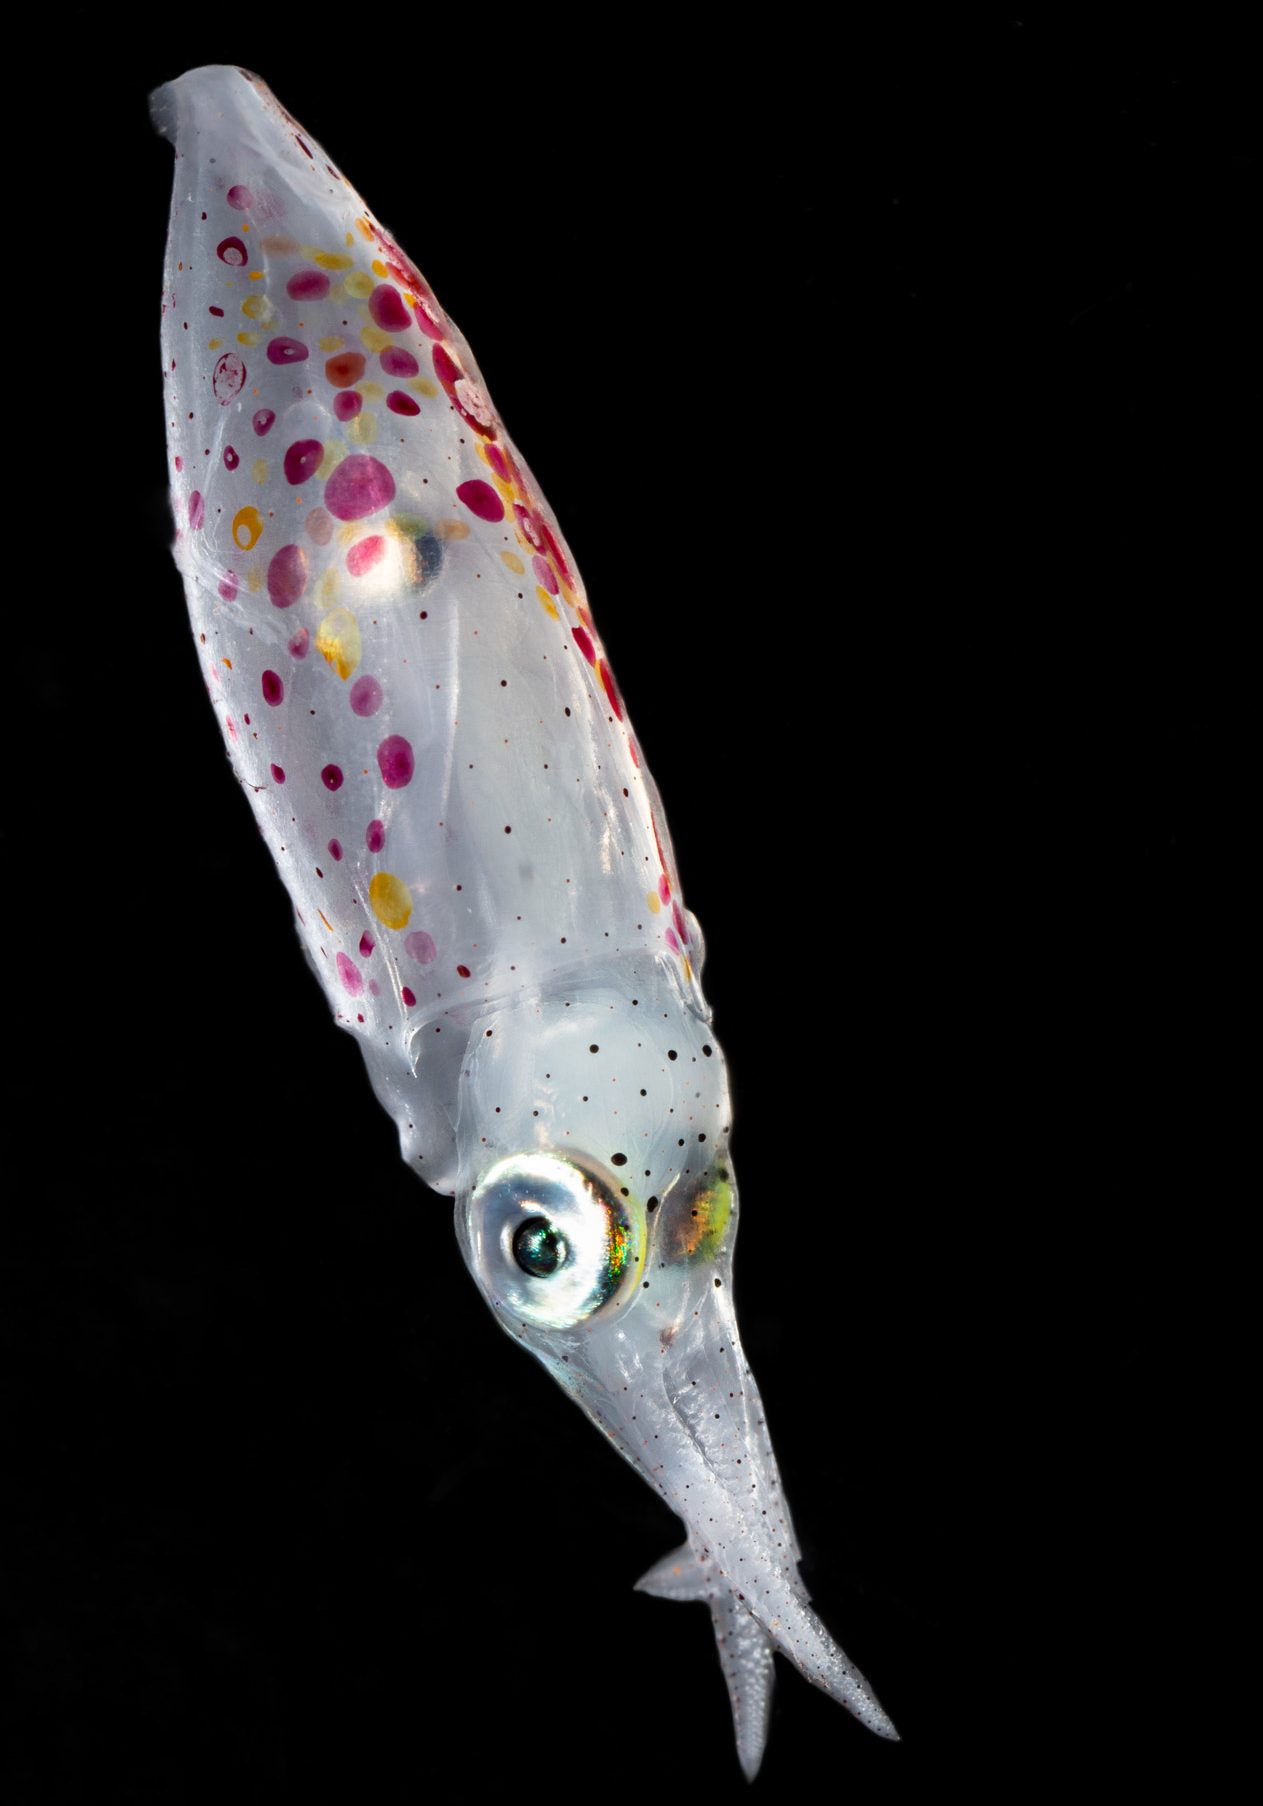 Confetti squid. Photo by Paul Caiger, Woods Hole Oceanographic Institution.